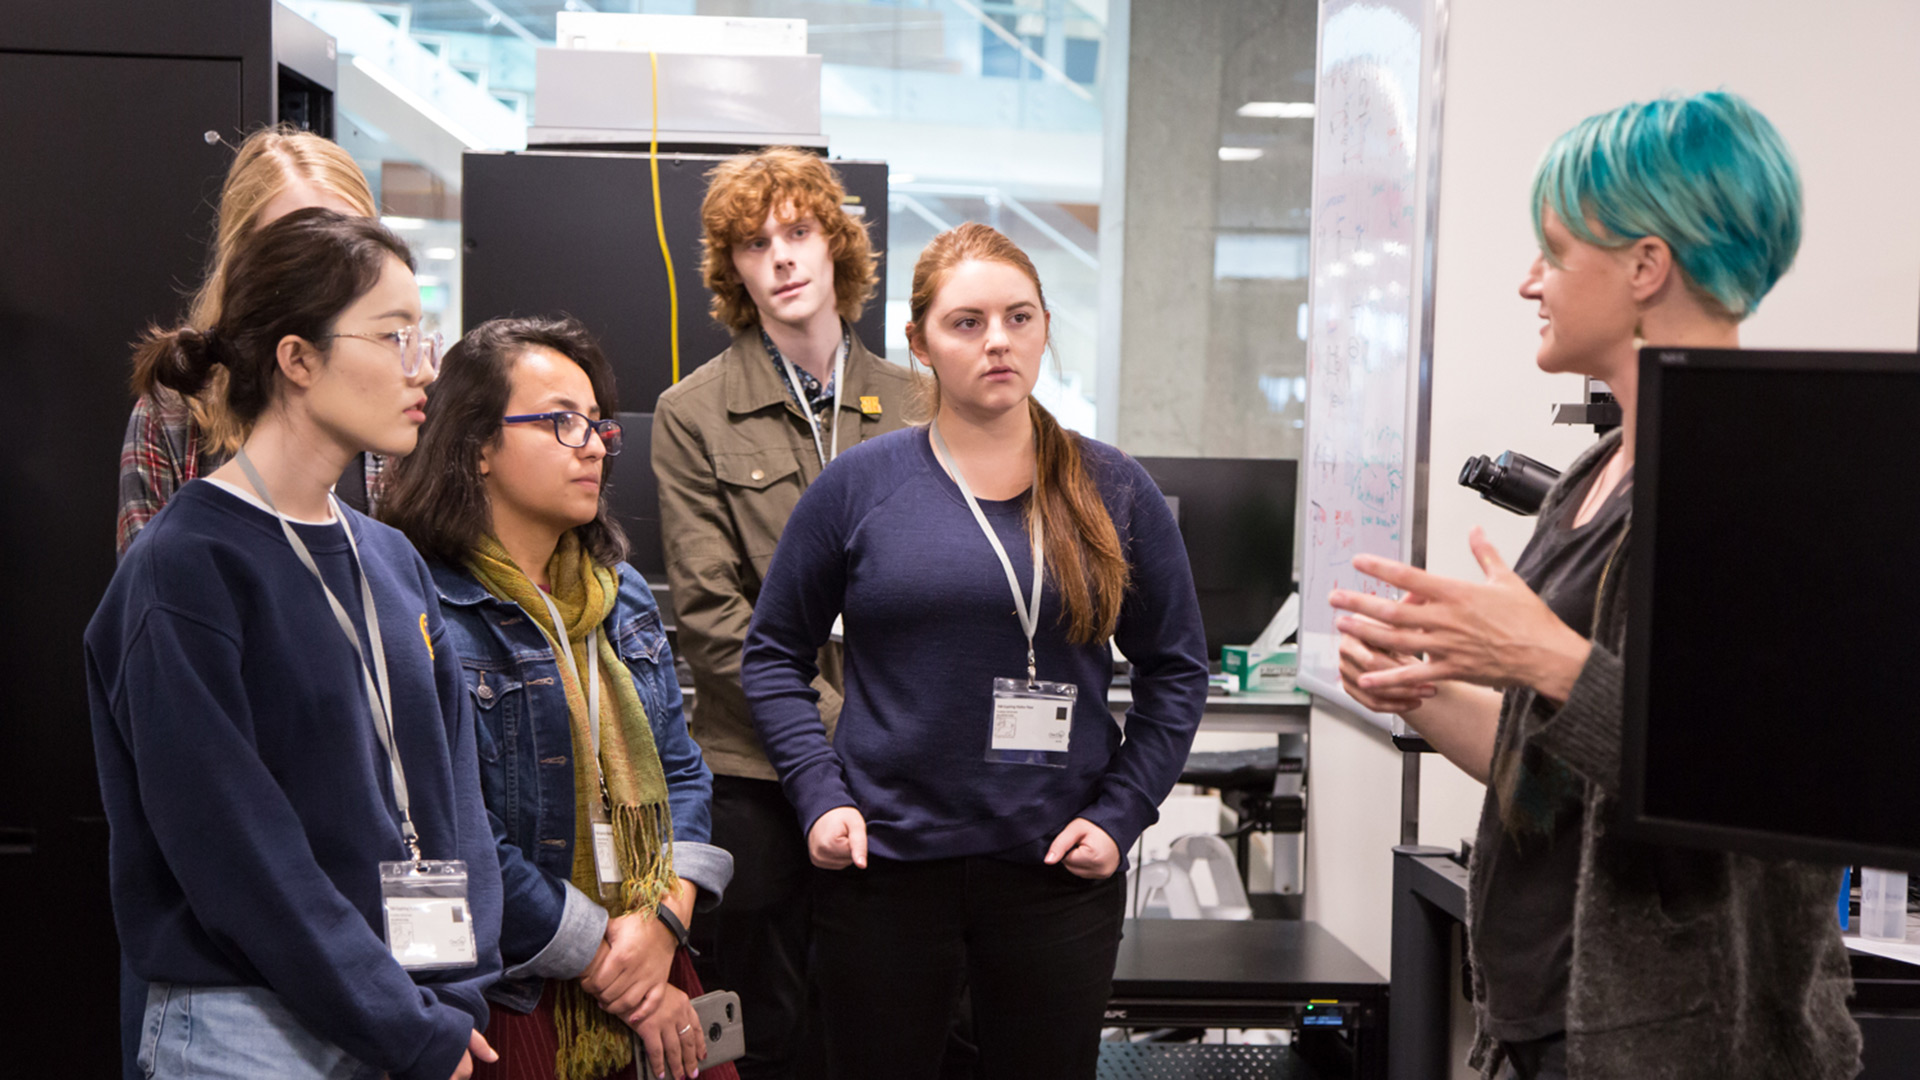 Students from the University of Washington tour a lab at the Allen Institute.